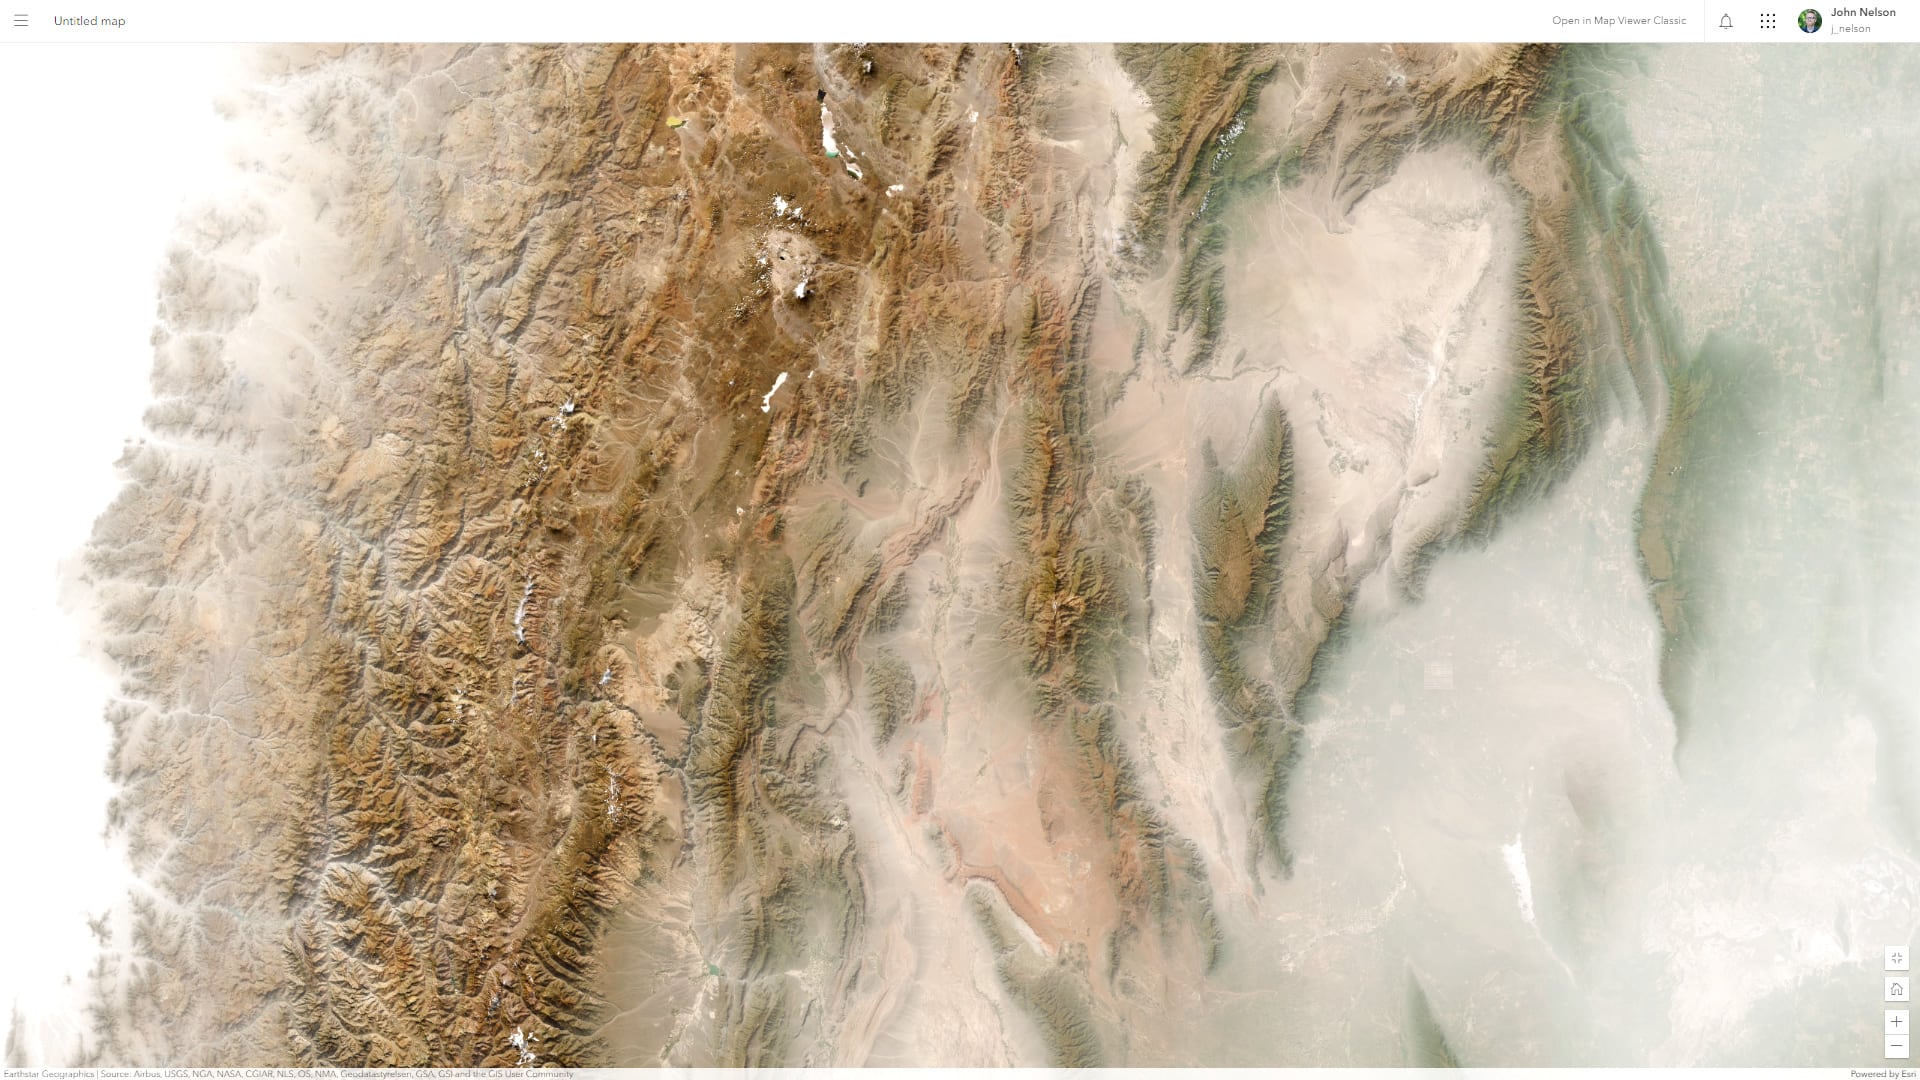 ArcGIs Online imagery basemap blanketed in a ghostly mist effect.